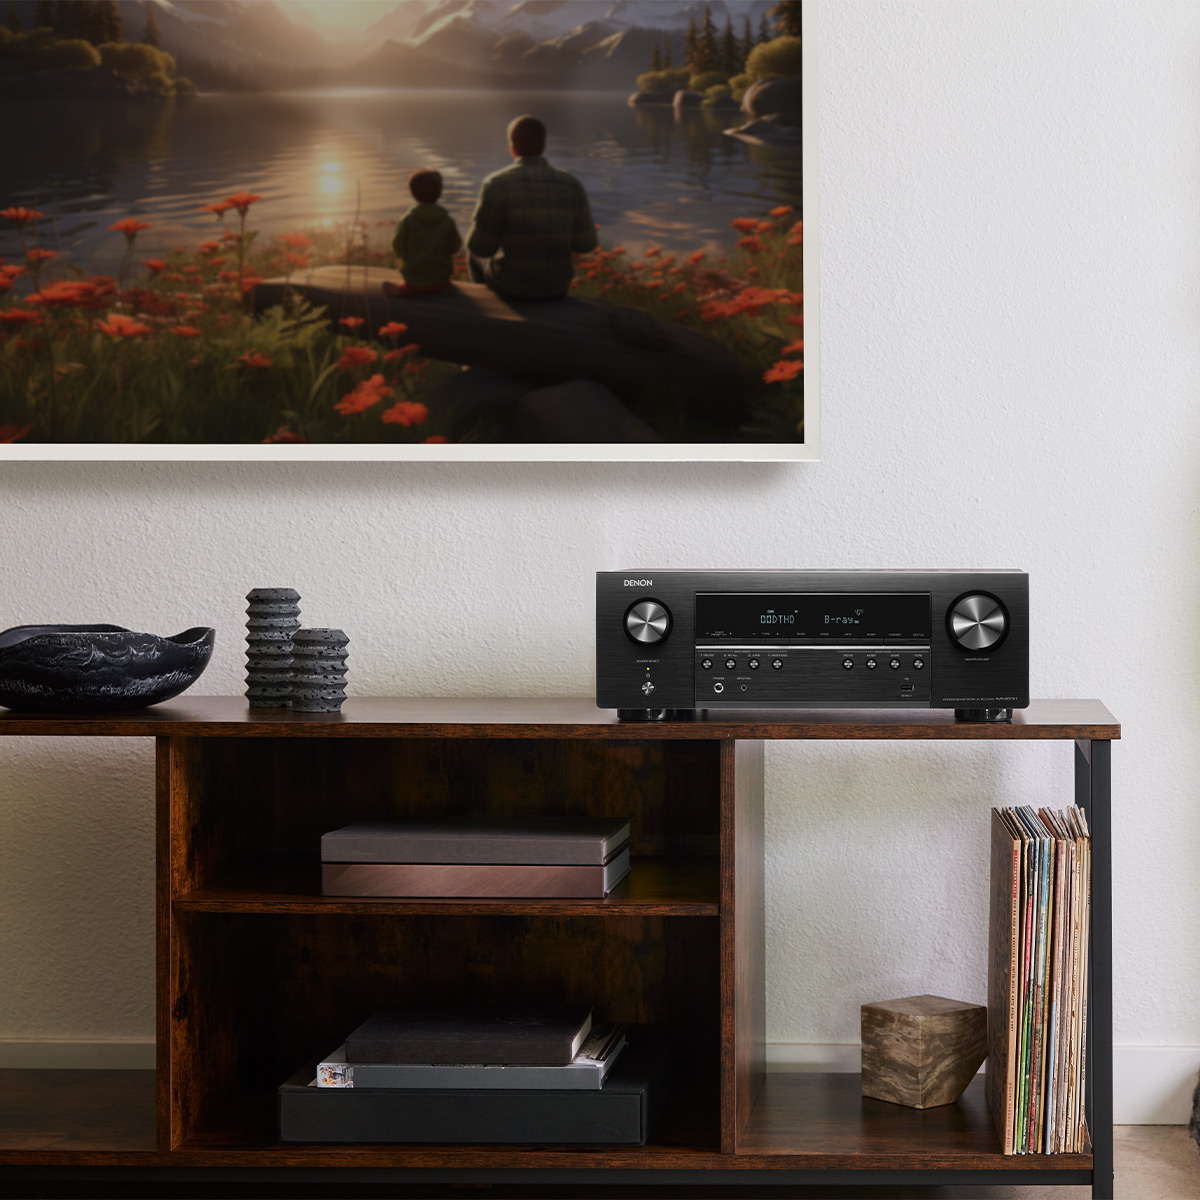 Denon AVR-S670H 5.2 Channel 8K Home Theater Receiver with Dolby TrueHD Audio, HDR10+, and HEOS Built-In - image 2 of 10